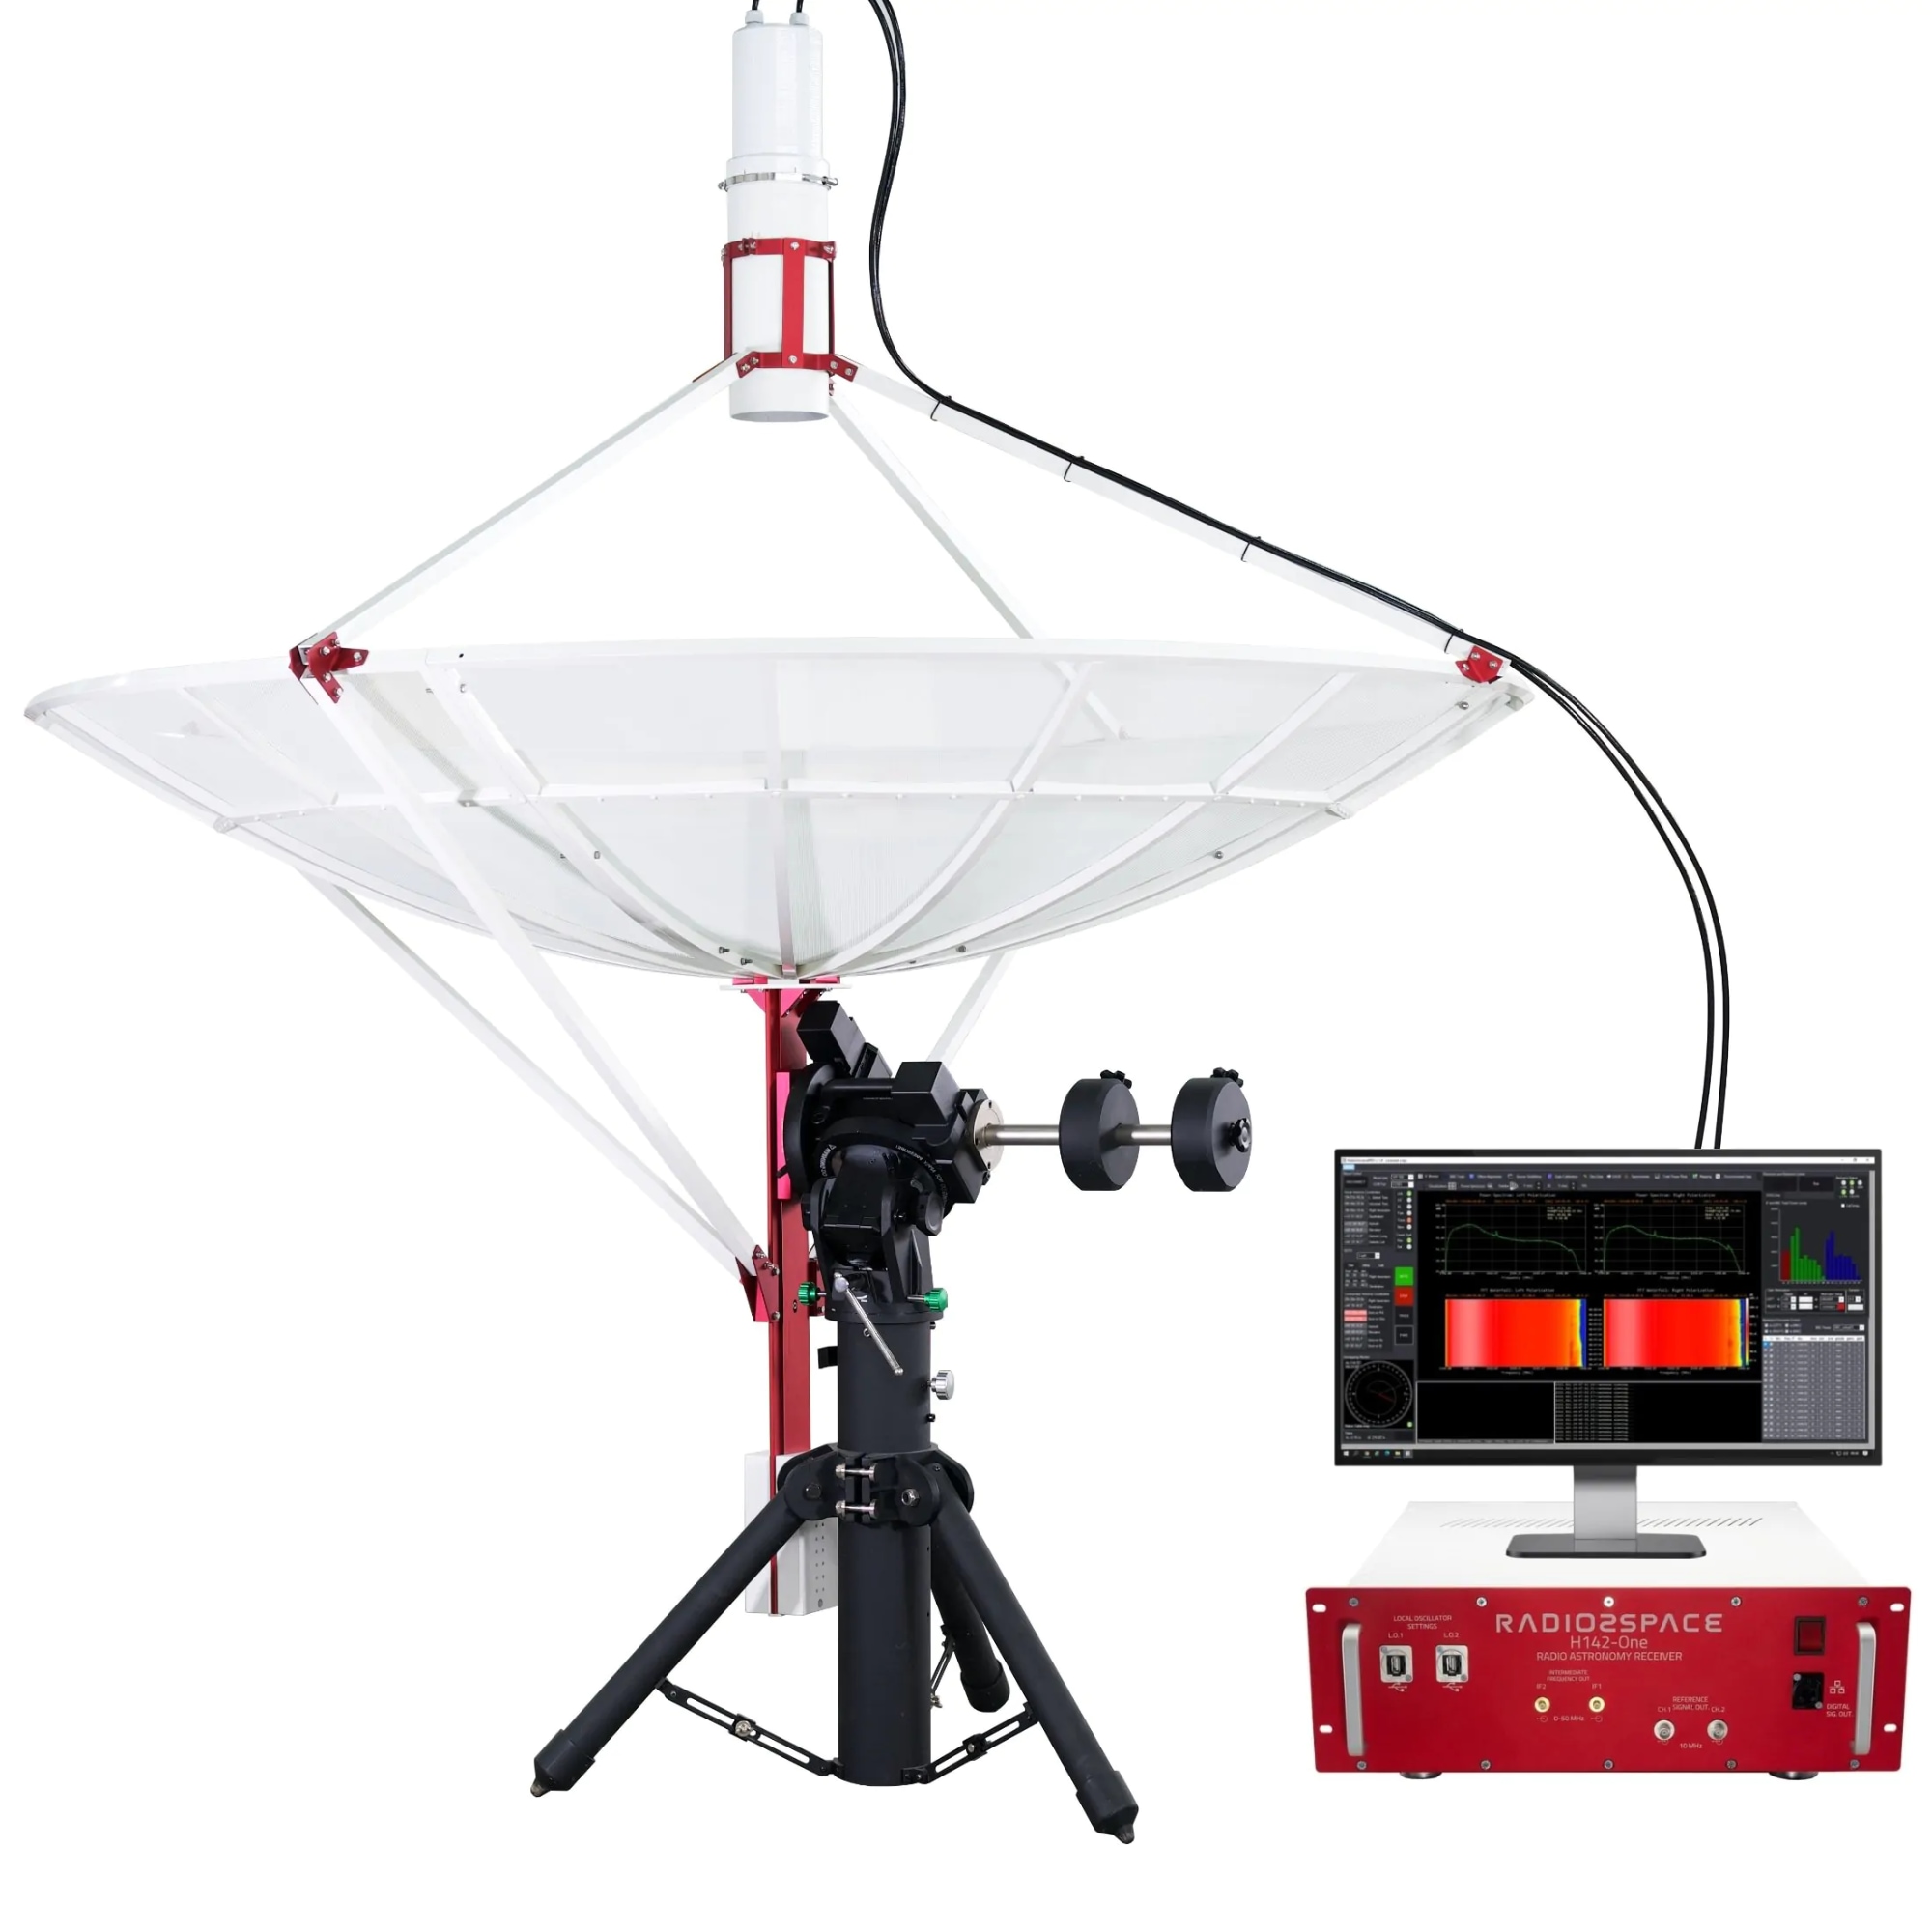 SPIDER 230C compact radio telescope, kit without mount